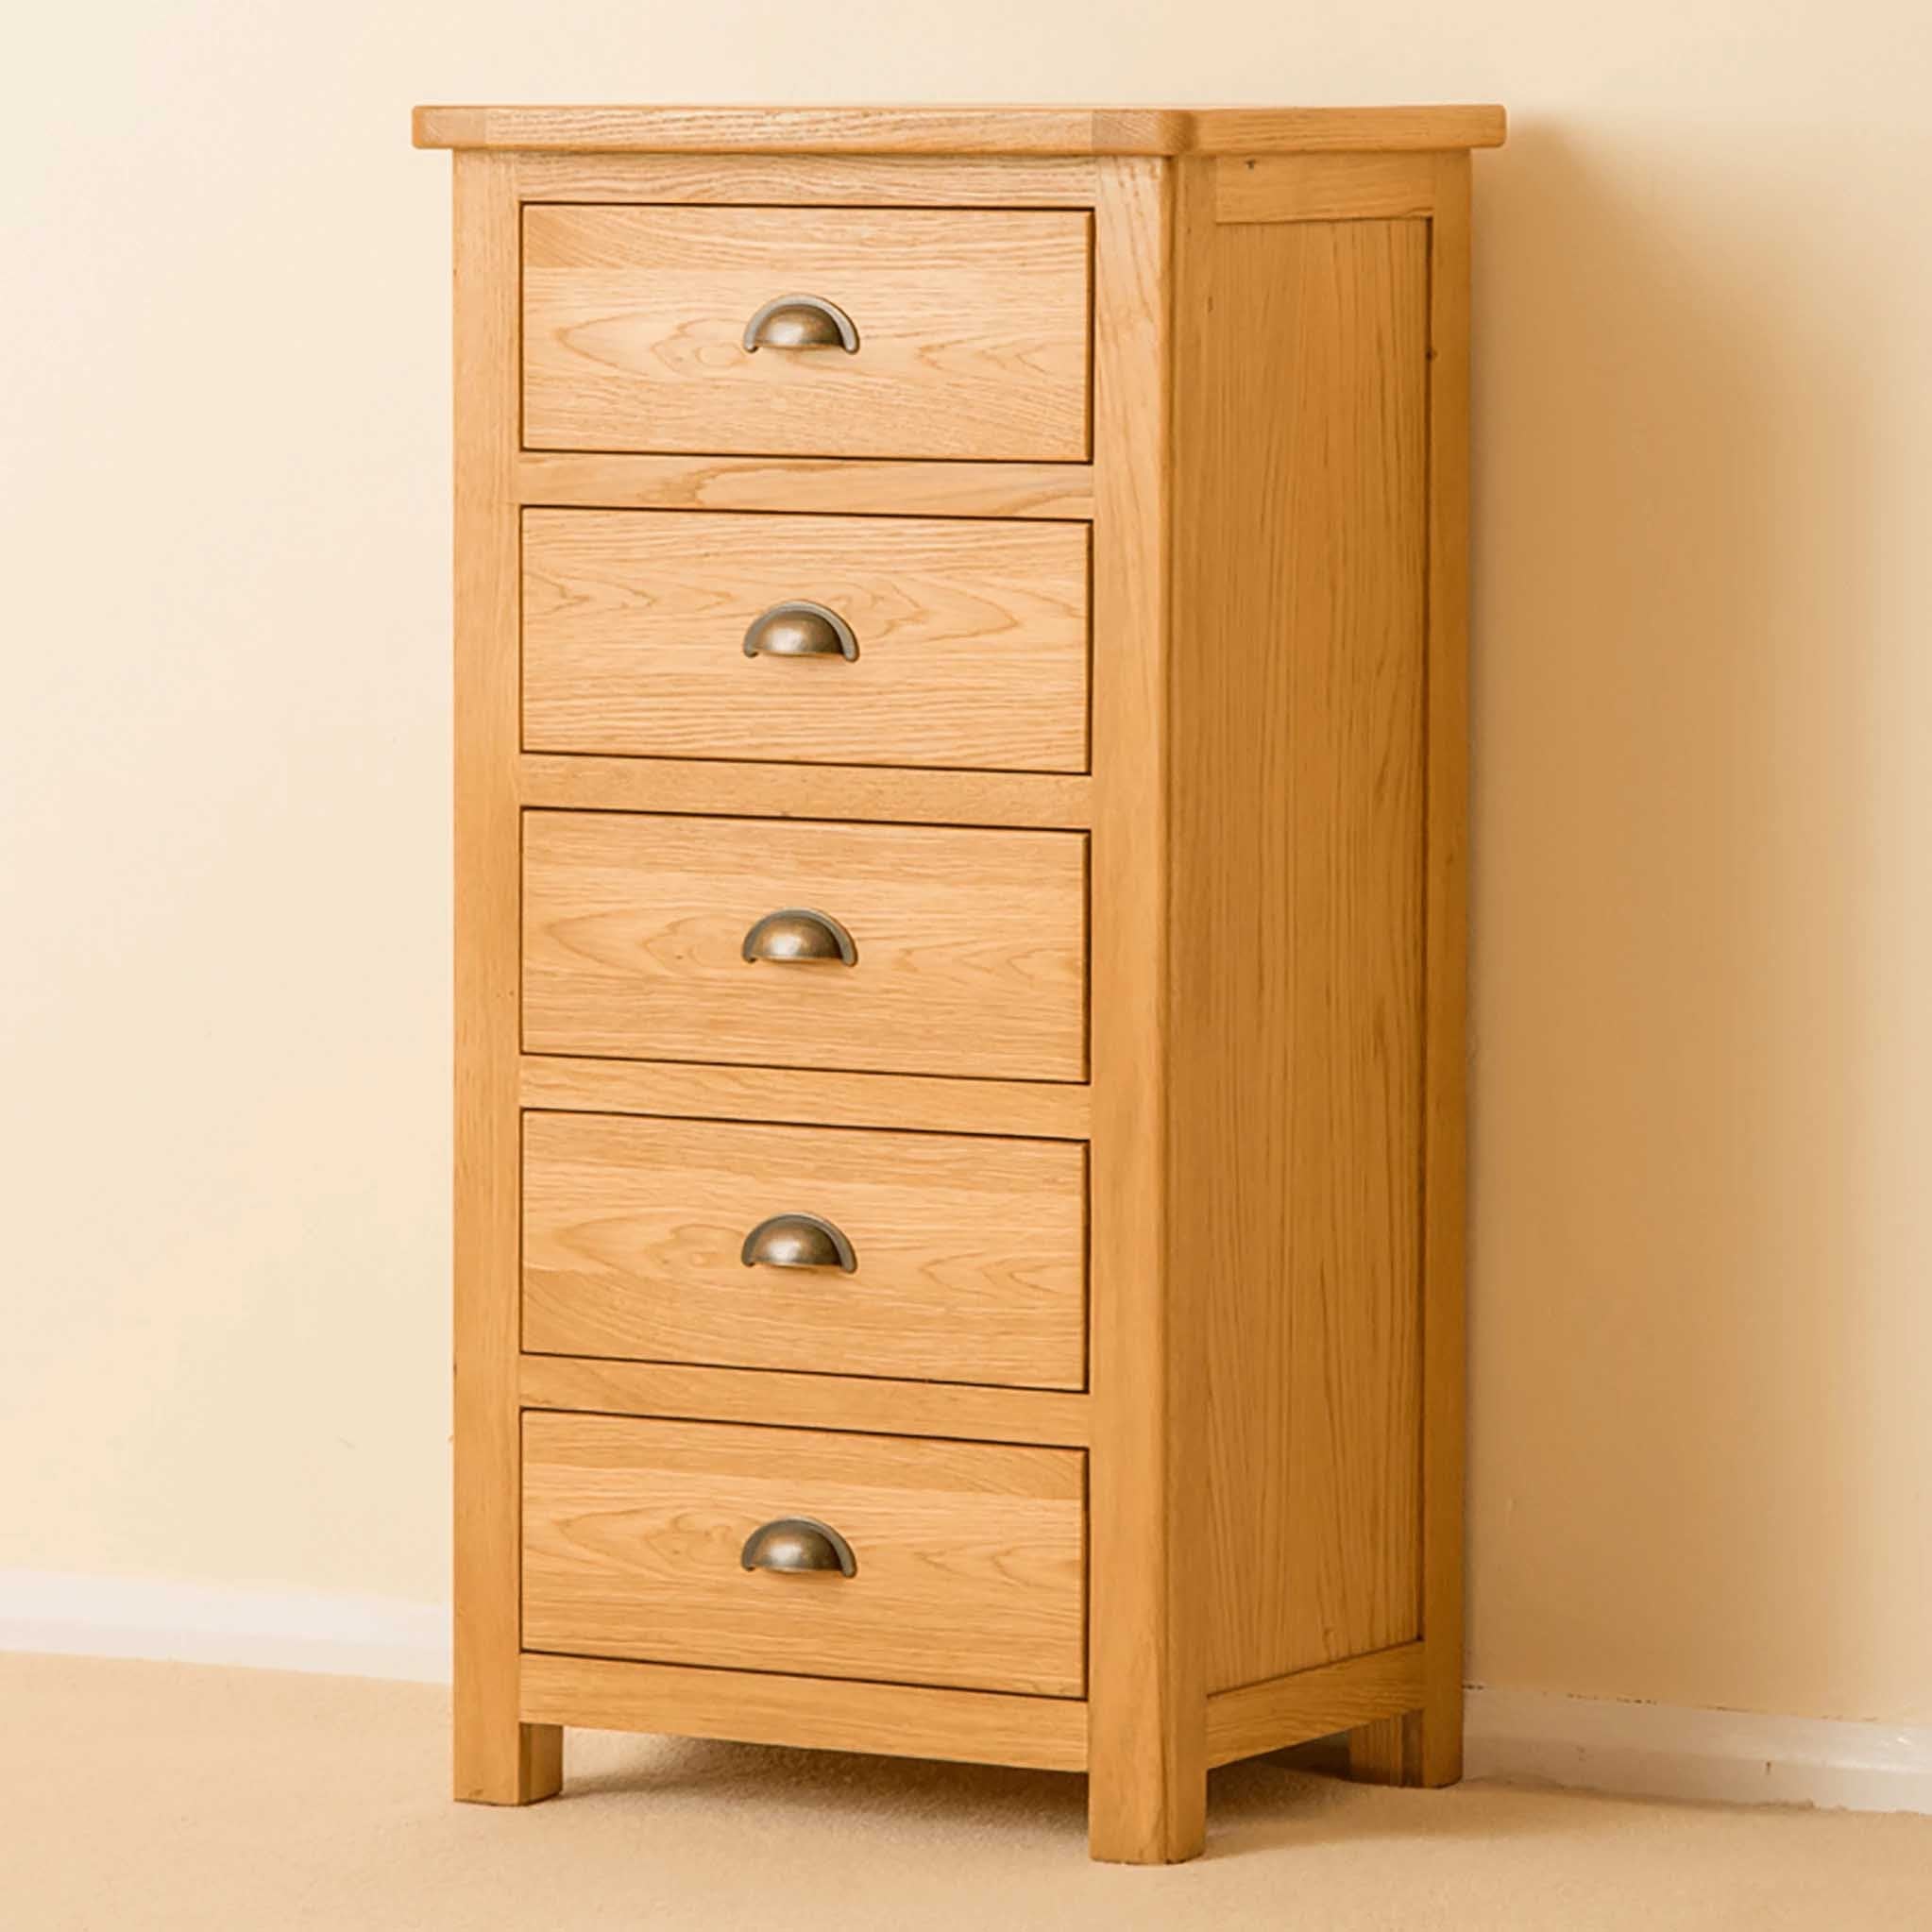 Tallboys Wellington Chests Slim Chest Of Drawers Oak And Painted